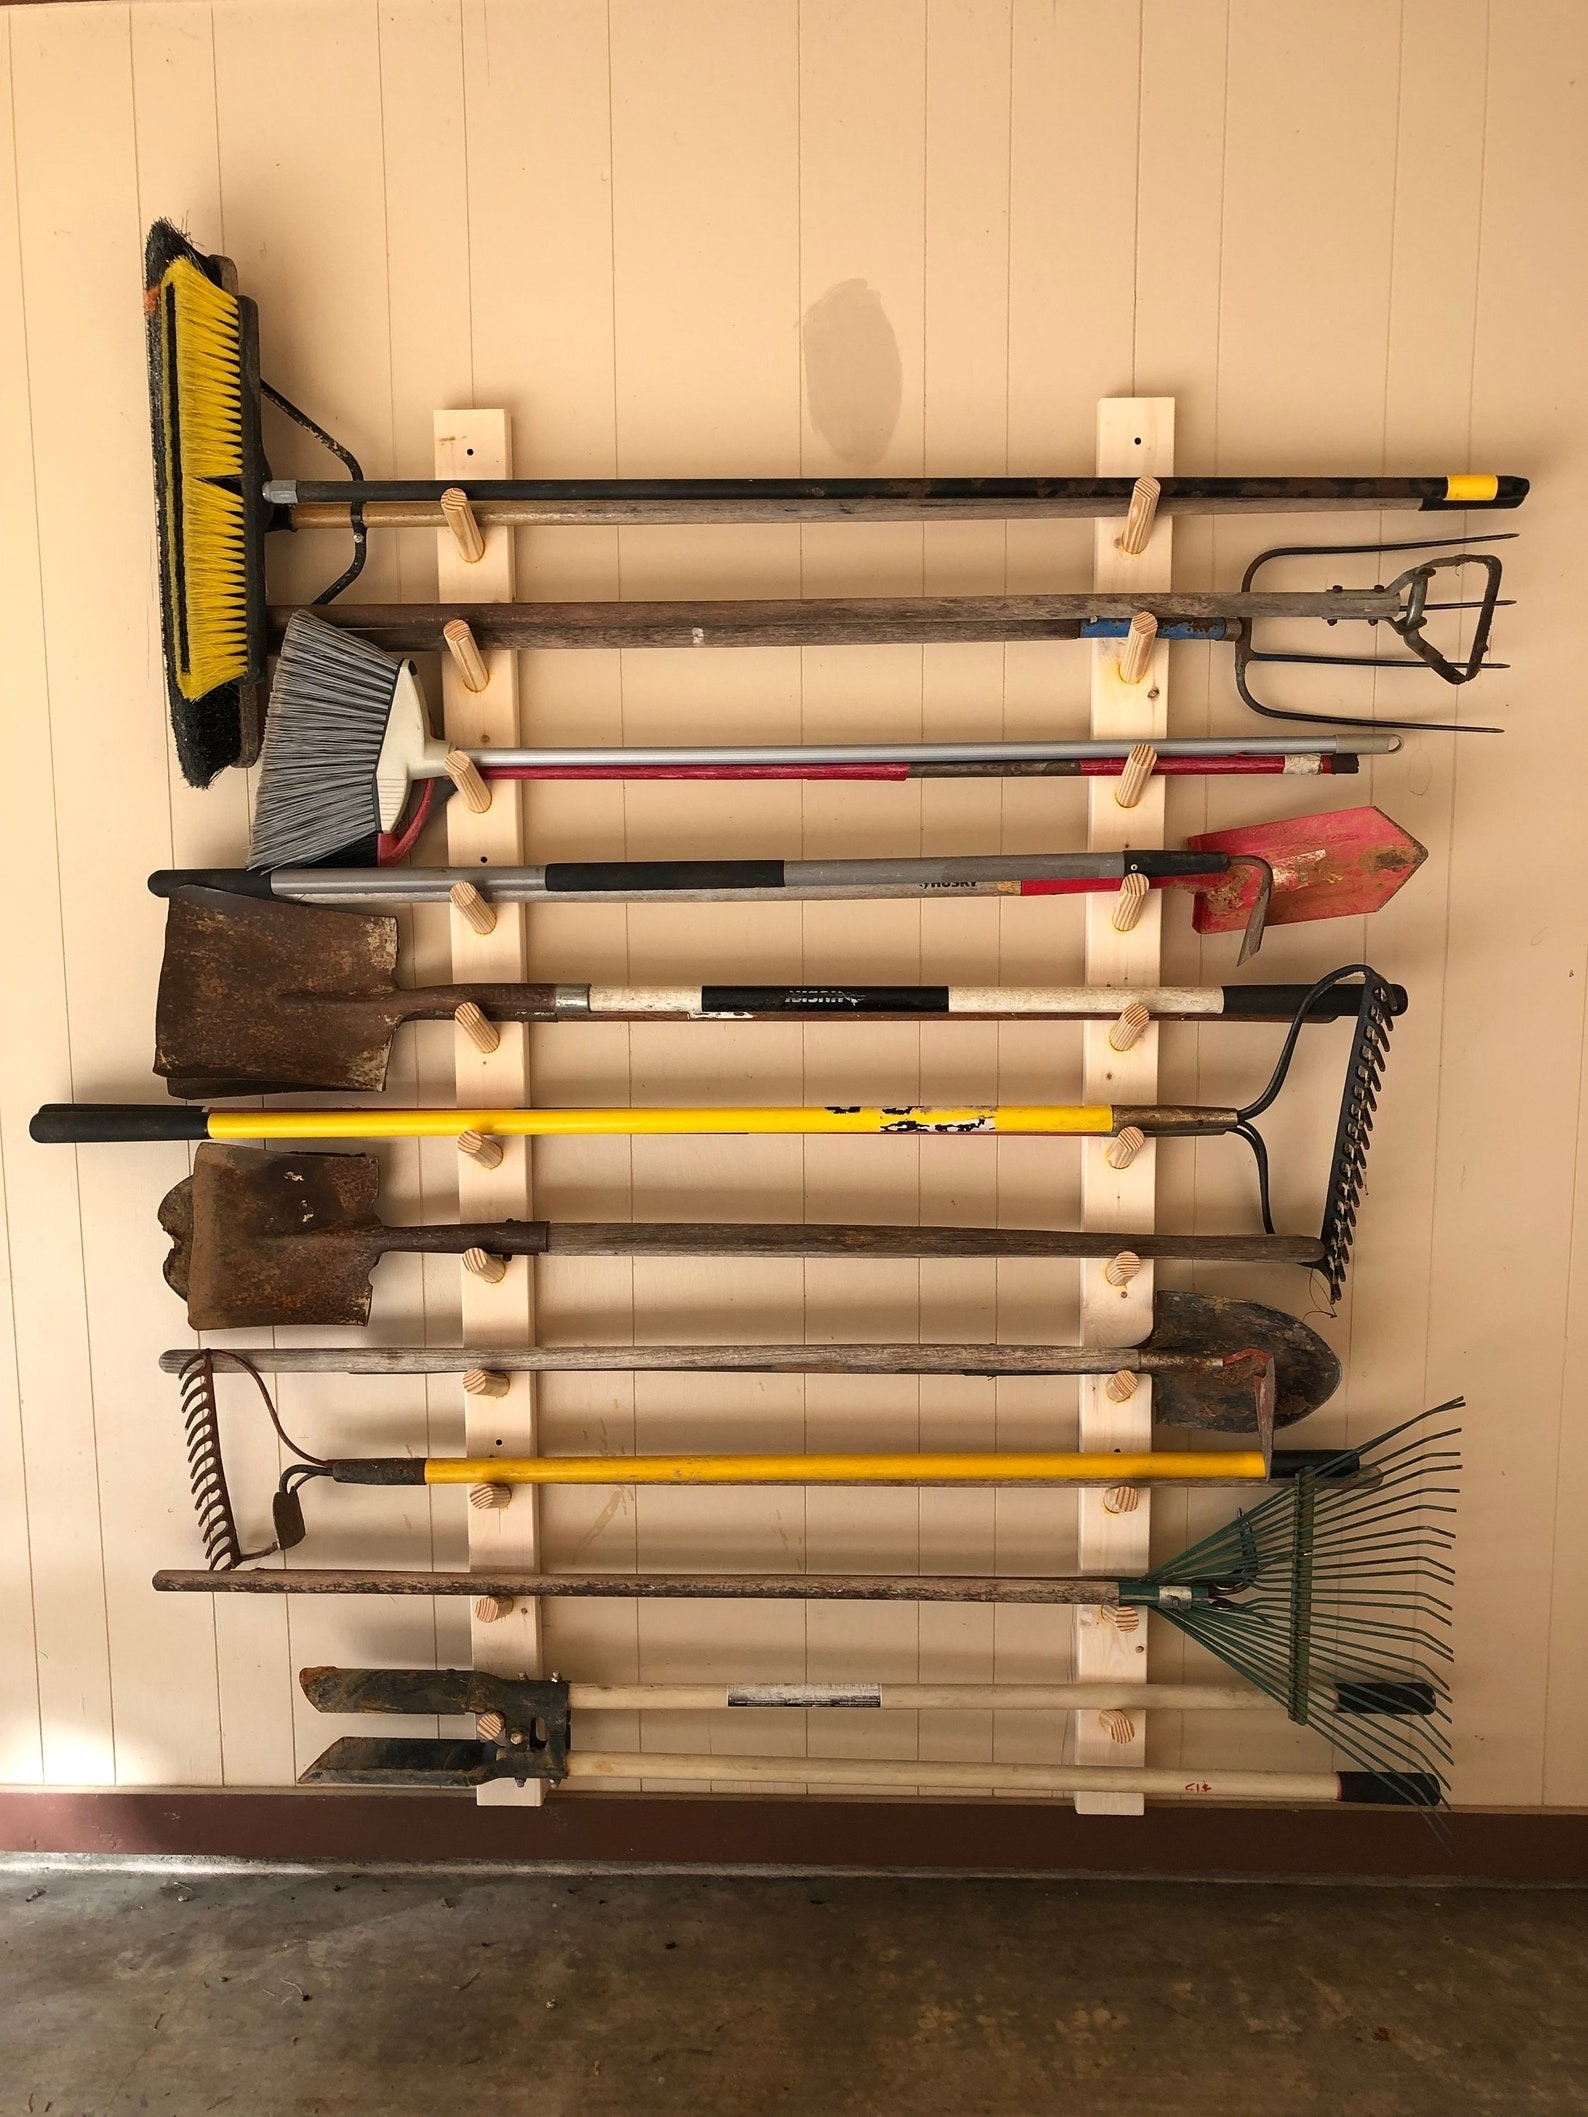 Assorted garden tools including shovels and rakes hung neatly on a garage wall